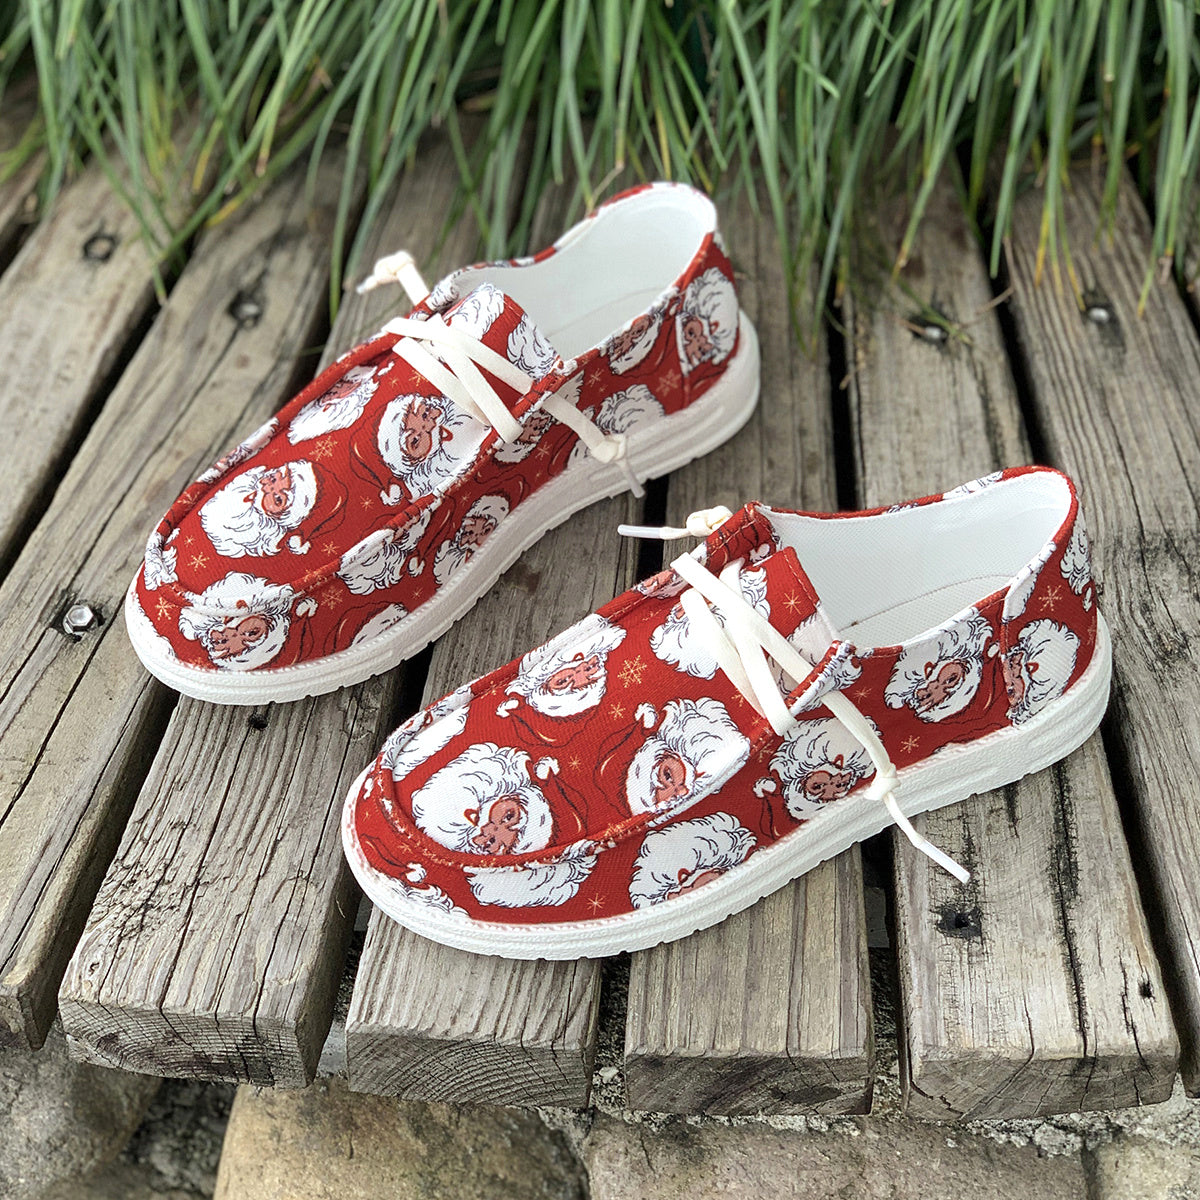 Women's Santa Claus Print Canvas Shoes, Casual Lace Up Outdoor Shoes, Lightweight Low Top Christmas  Sneakers